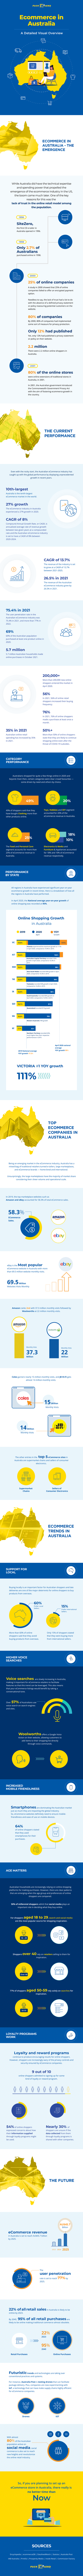 eCommerce in Australia - A Detailed Visual Overview